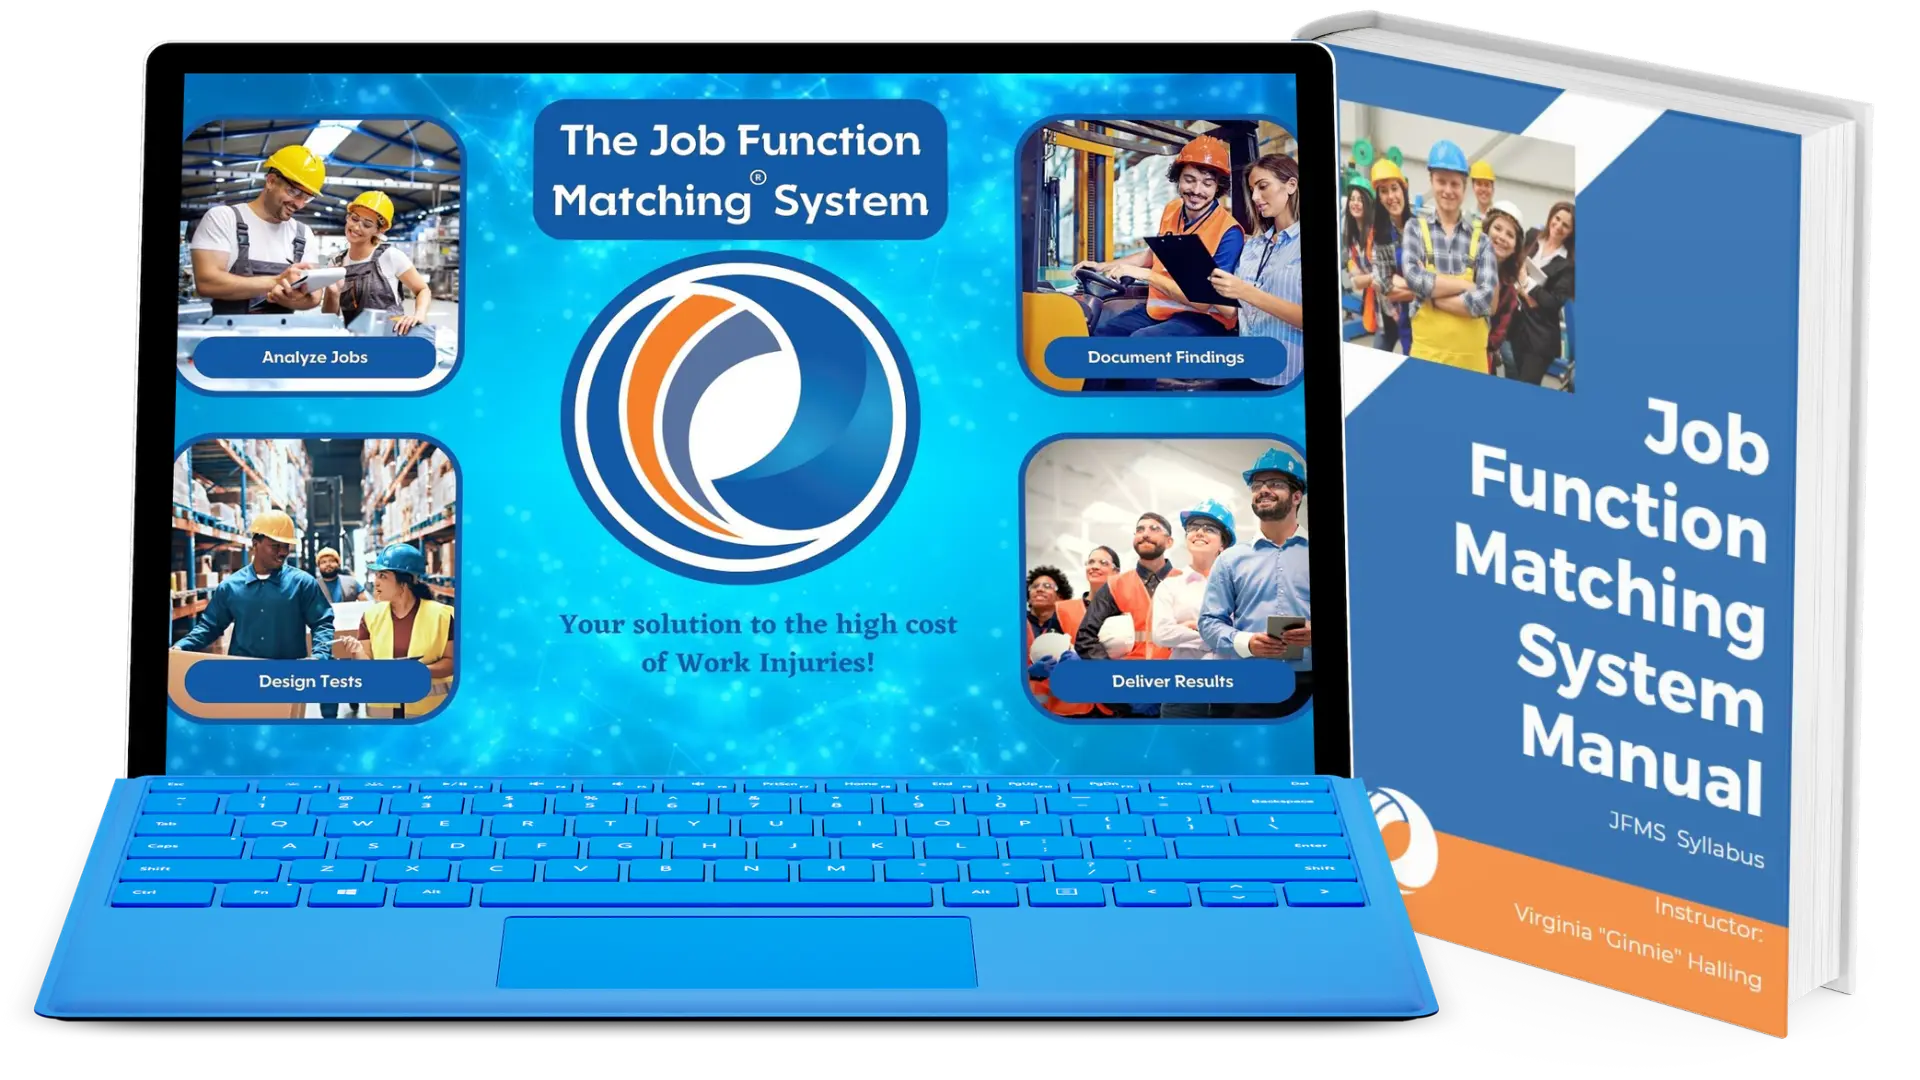 The Job Function Matching System Course and Manual Book